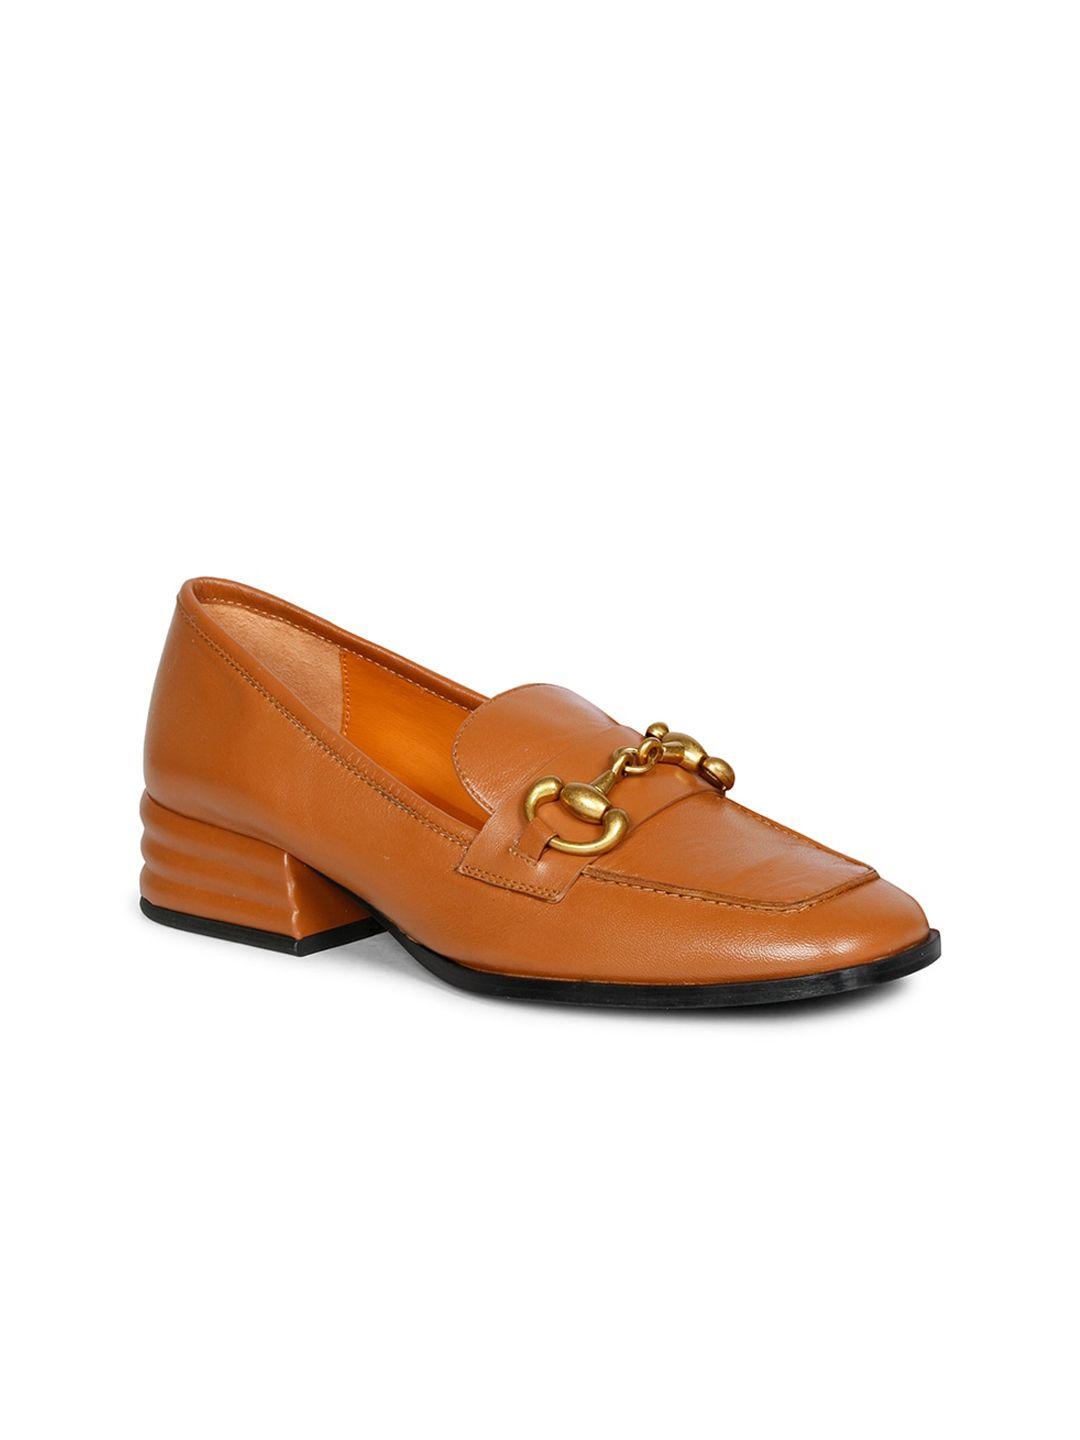 saint g tan leather block pumps with buckles